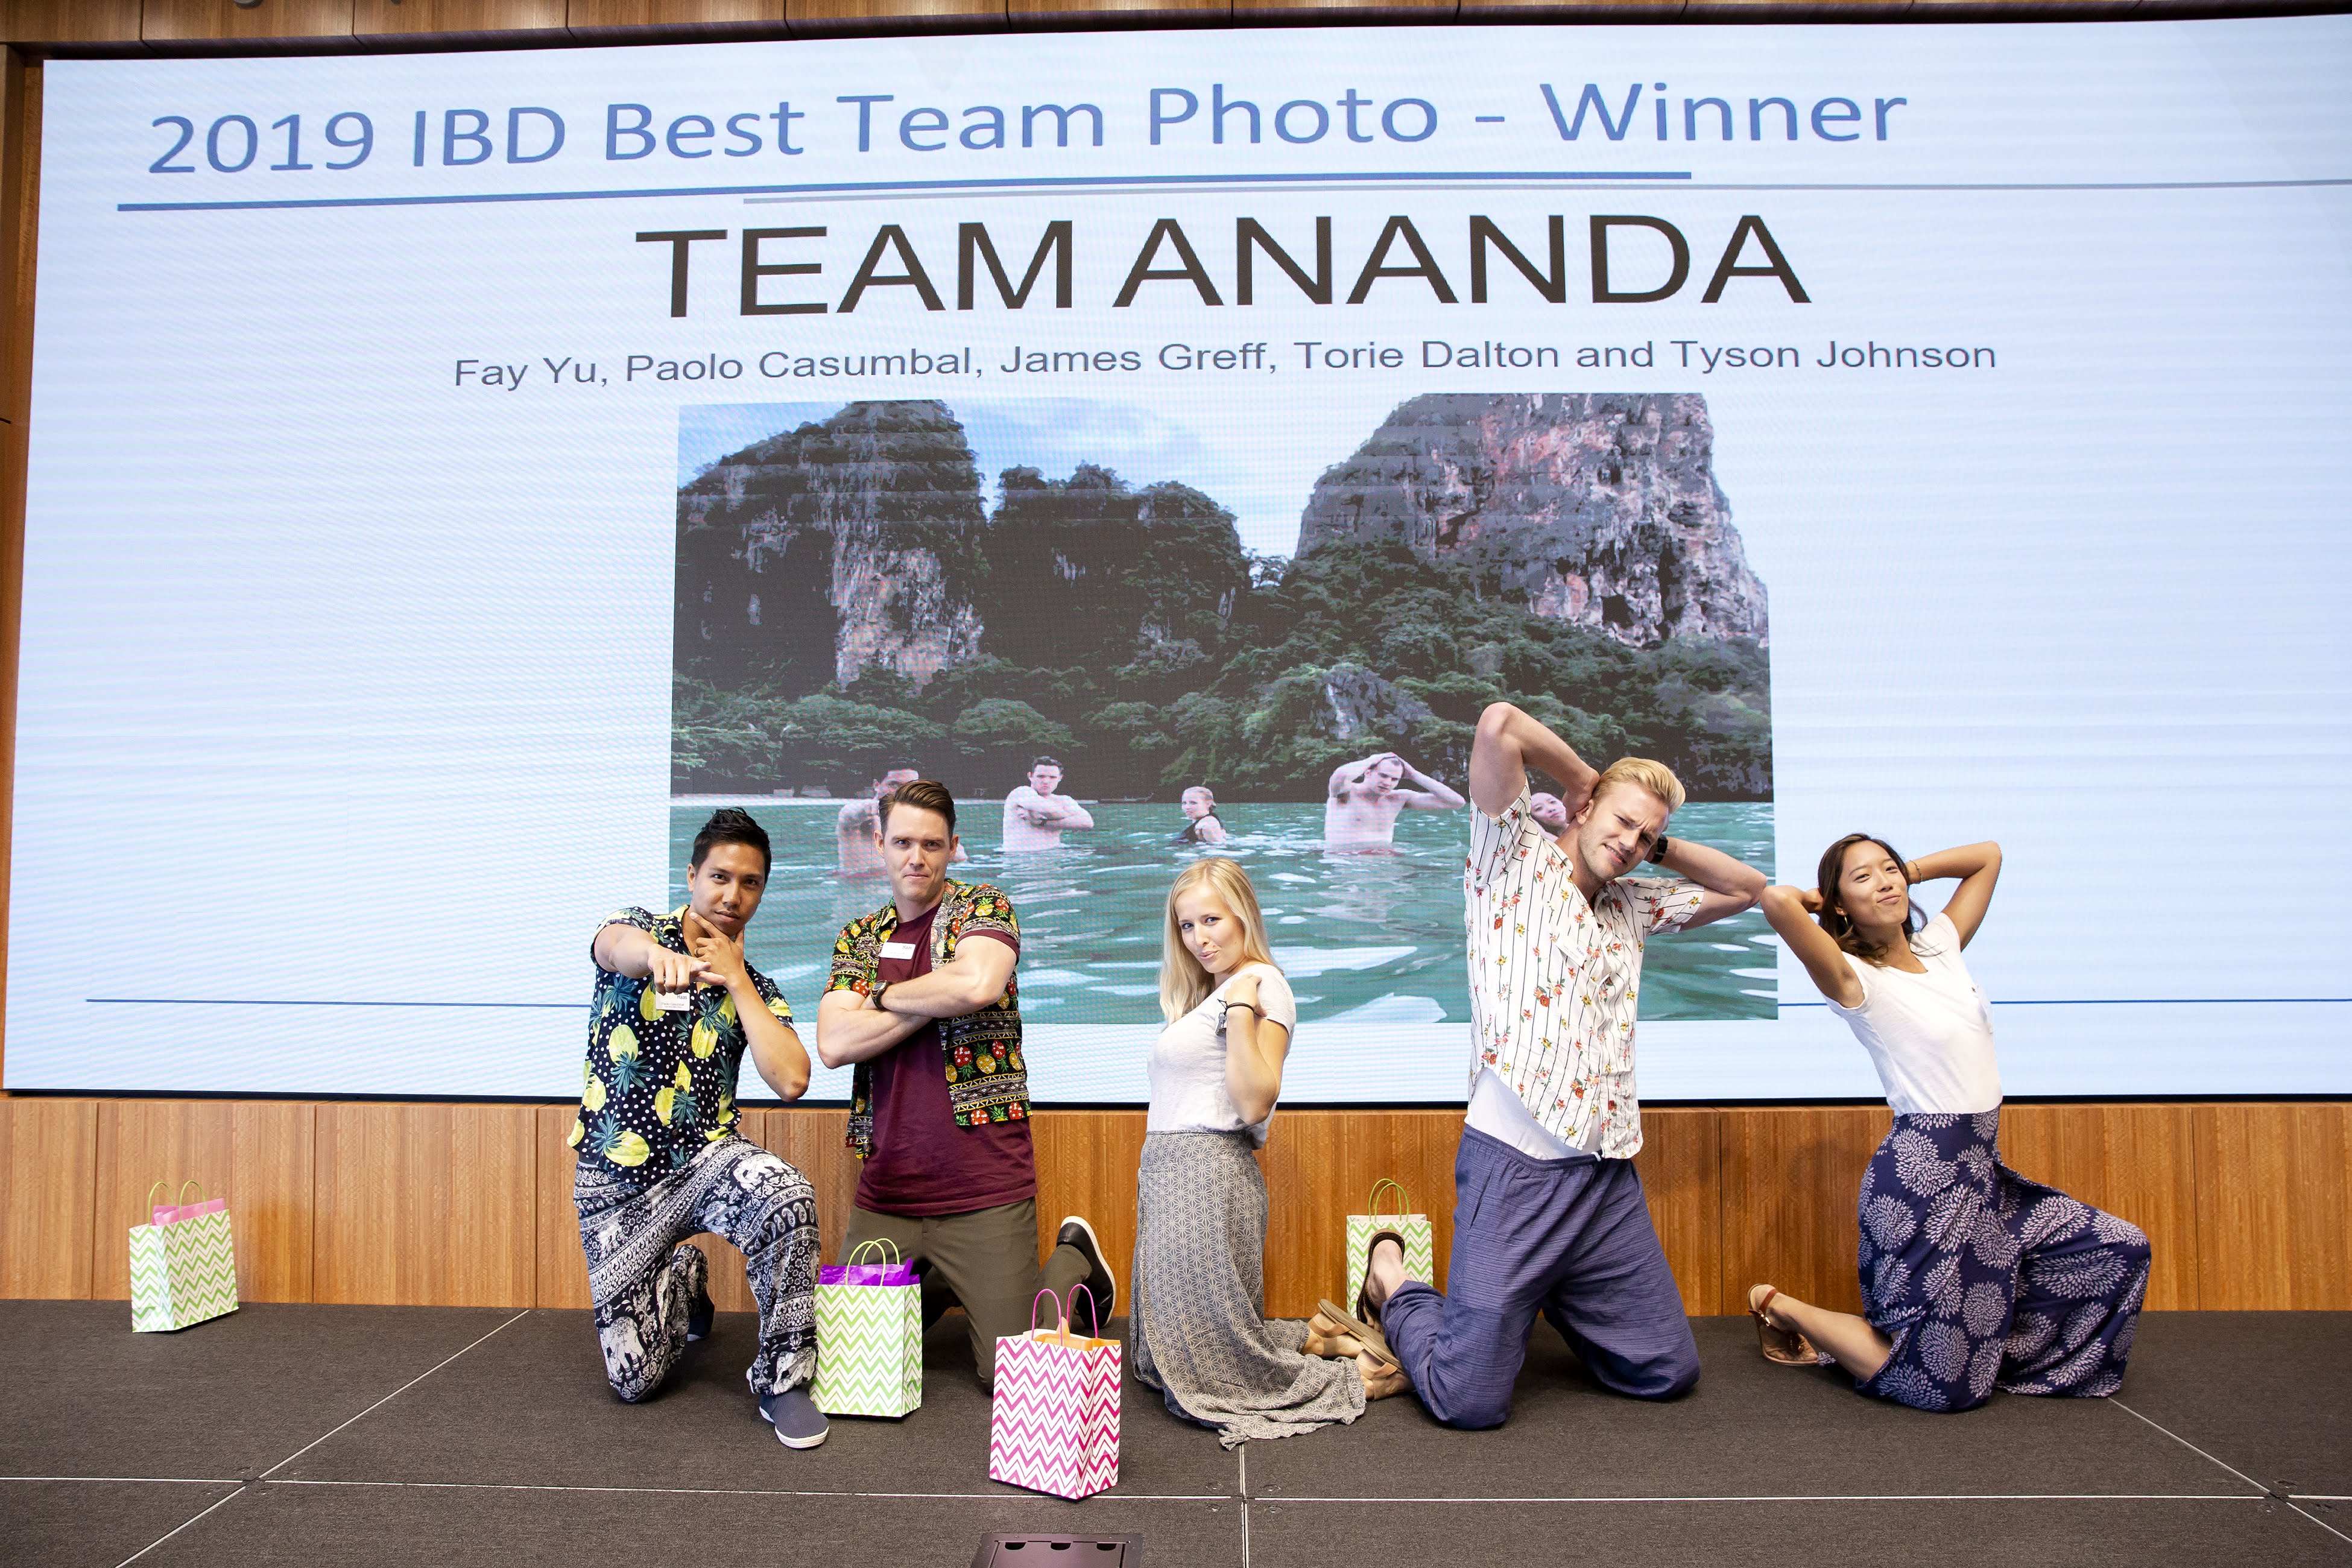 Team Ananda posing on stage after winning best team photo 2019